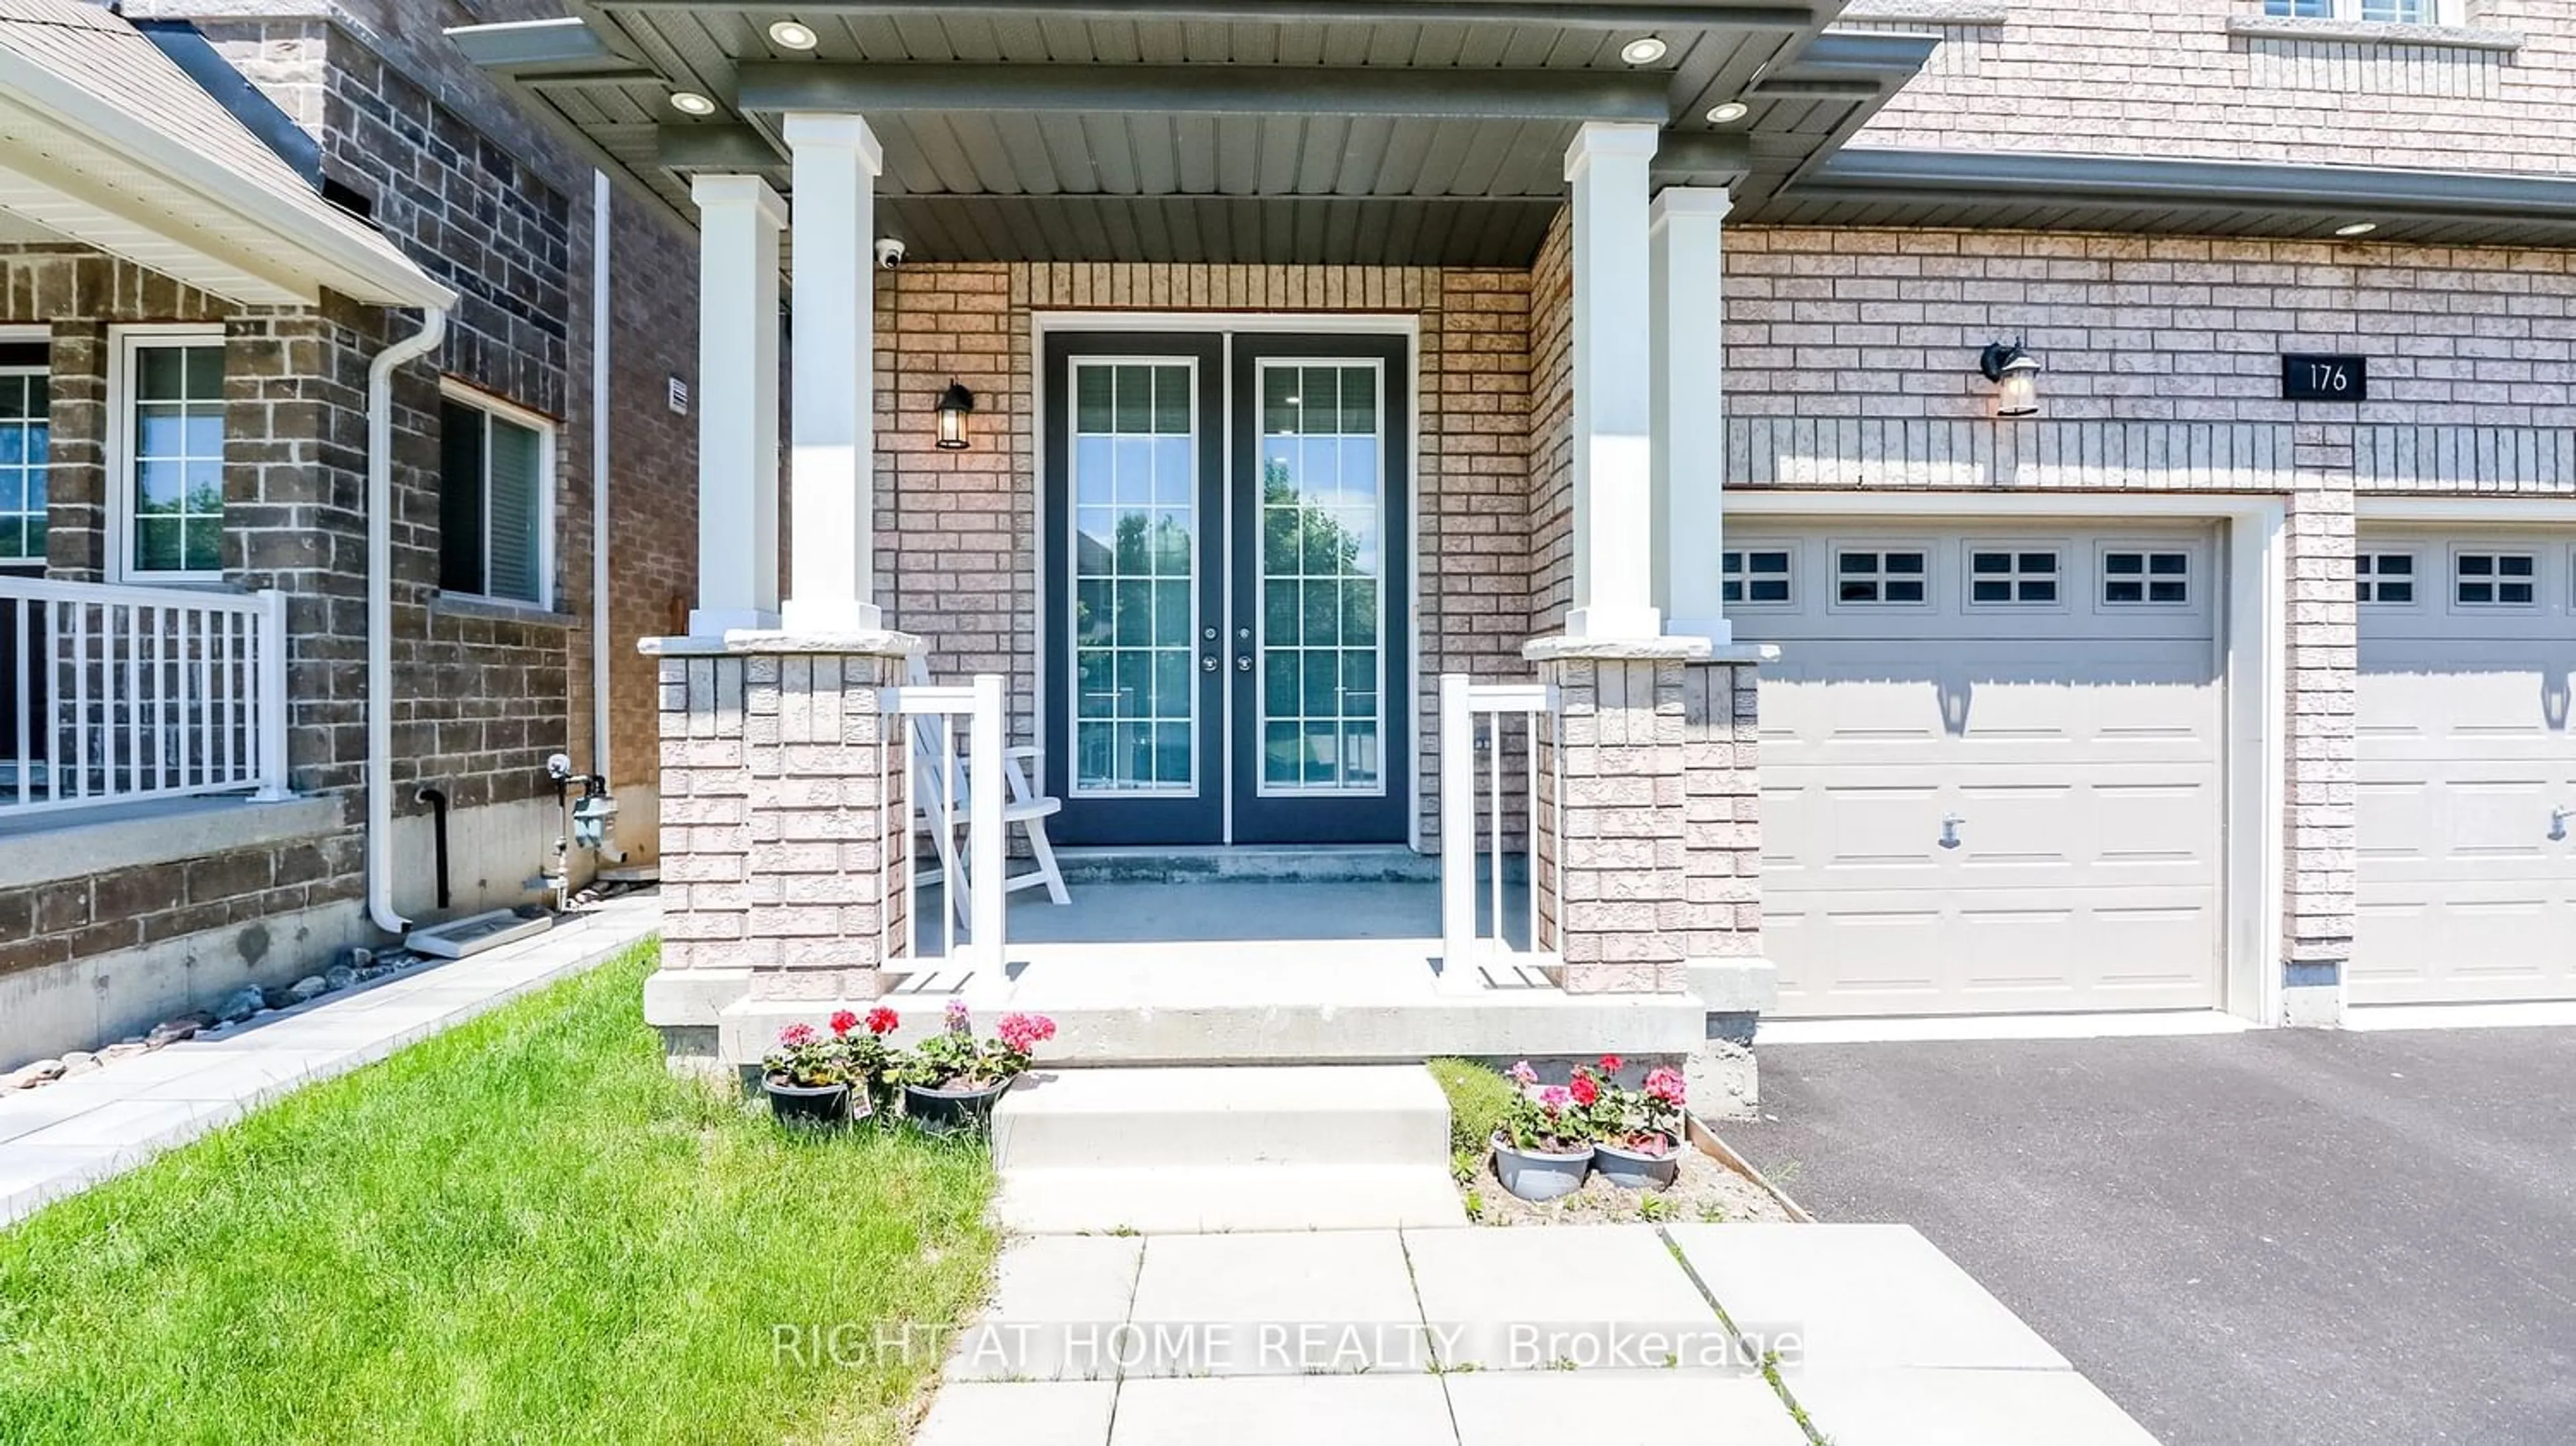 Indoor entryway for 176 BIRKHALL Pl, Barrie Ontario L4N 0K9